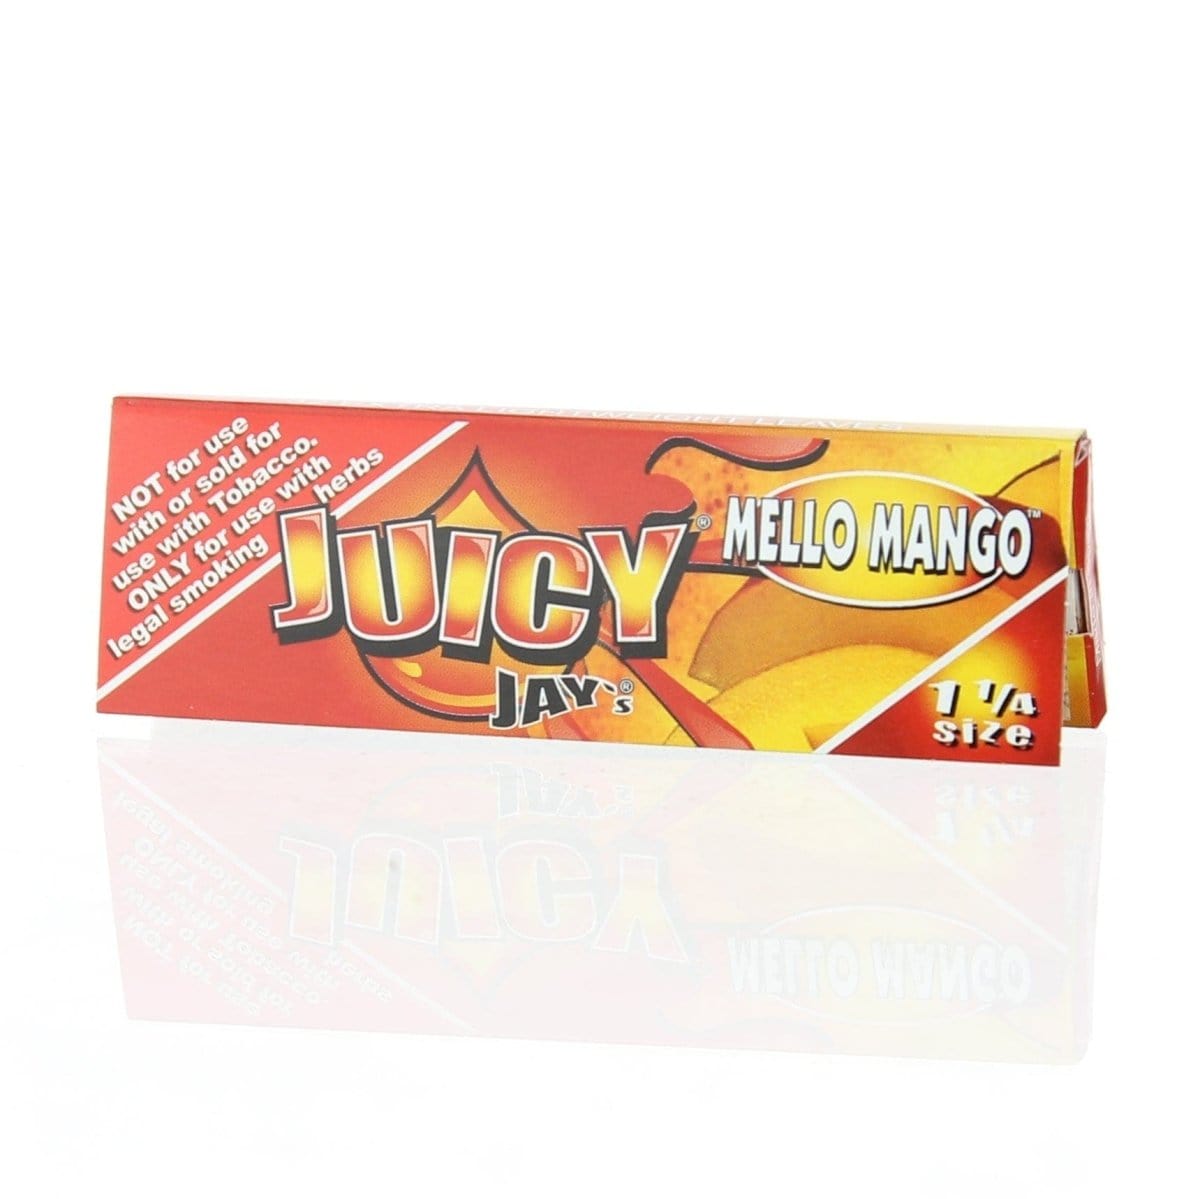 Juicy Jay's 1 1/4 Rolling Papers